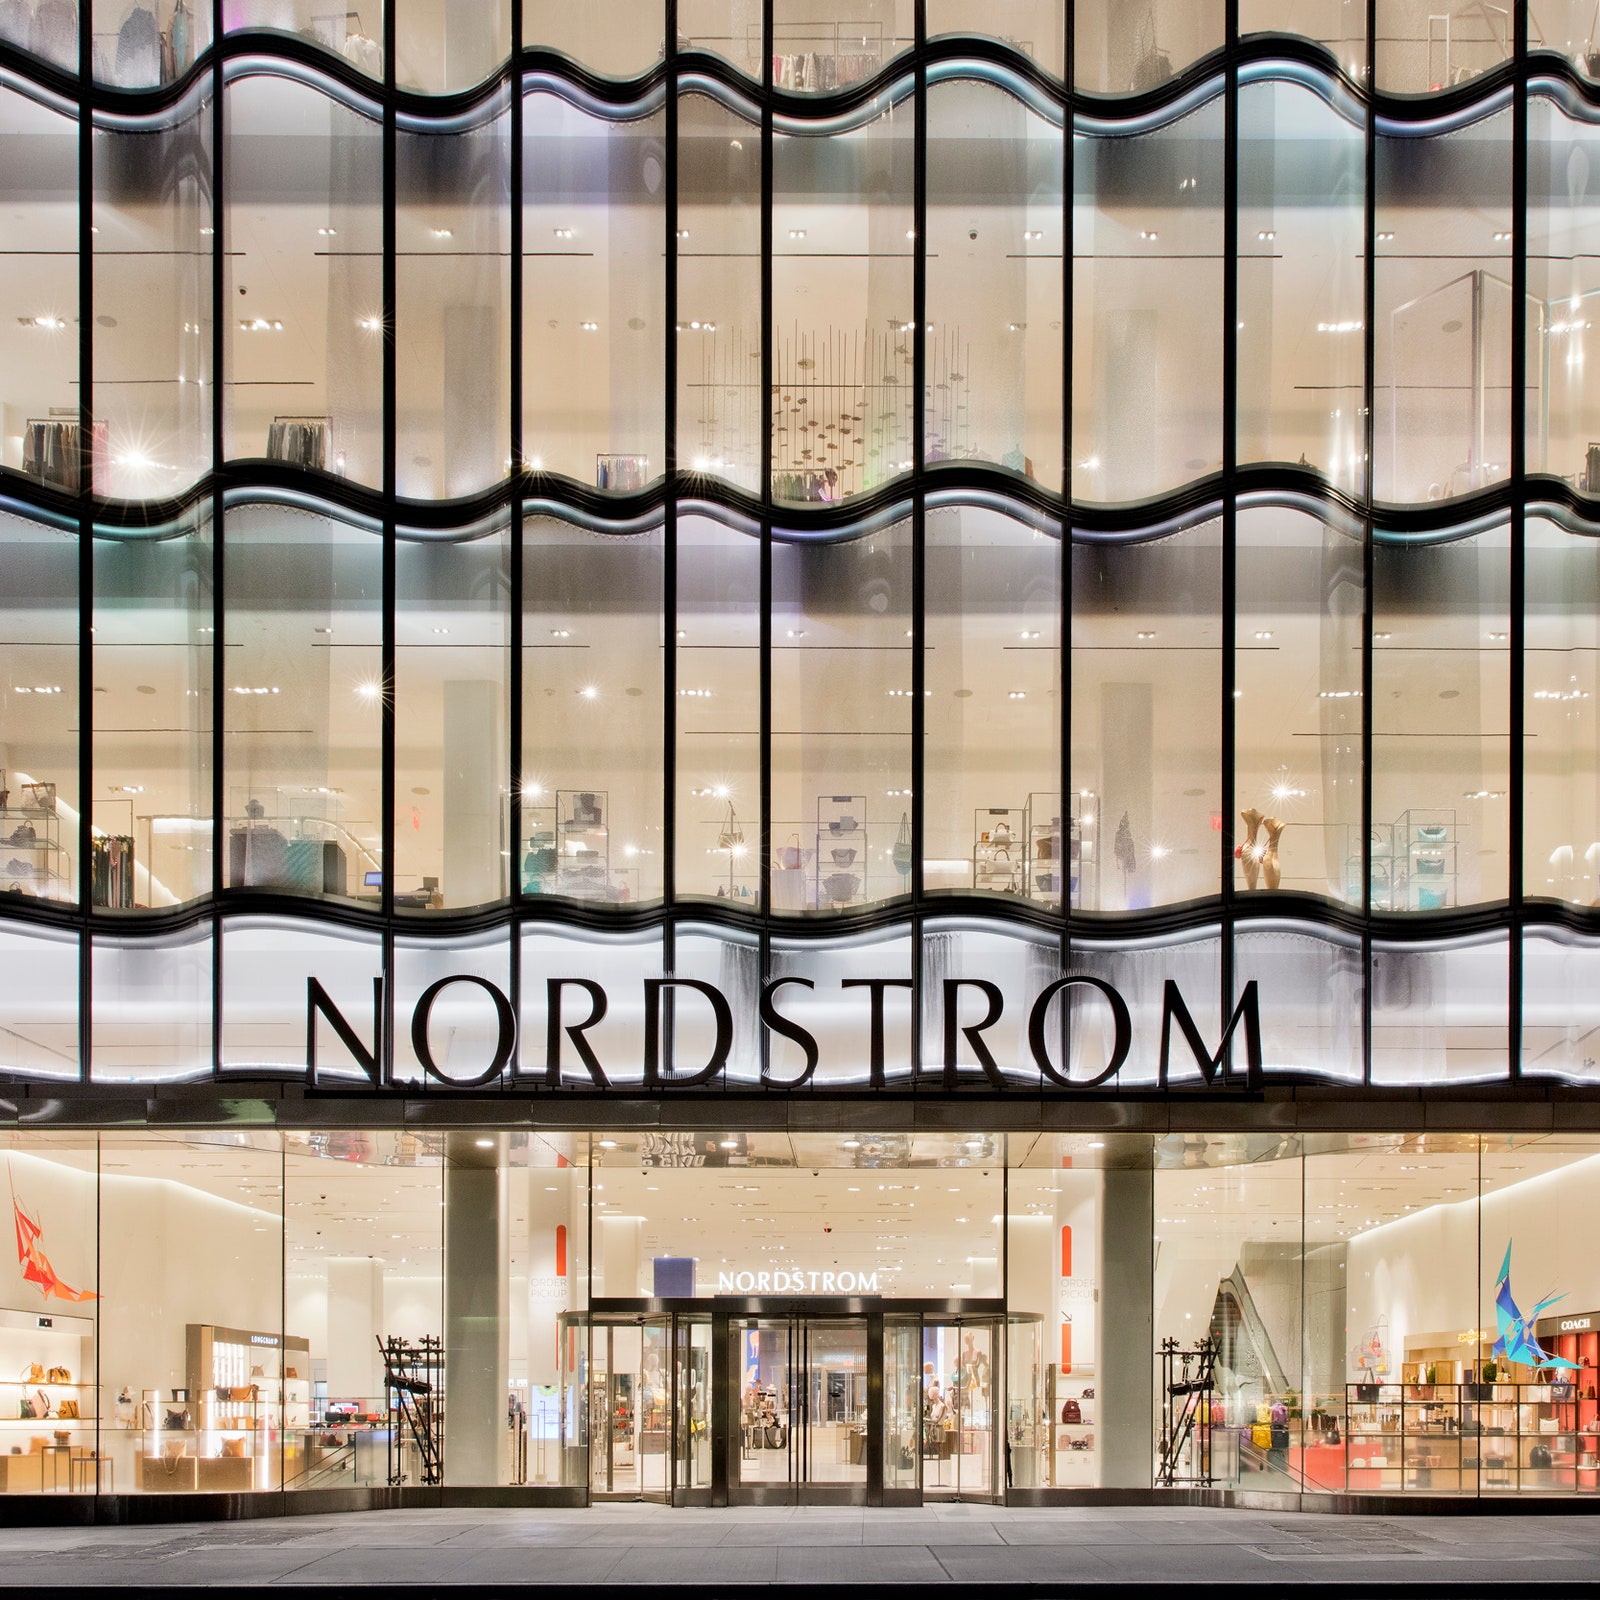 19 Travel Essentials to Shop During Nordstrom’s Half Yearly Sale